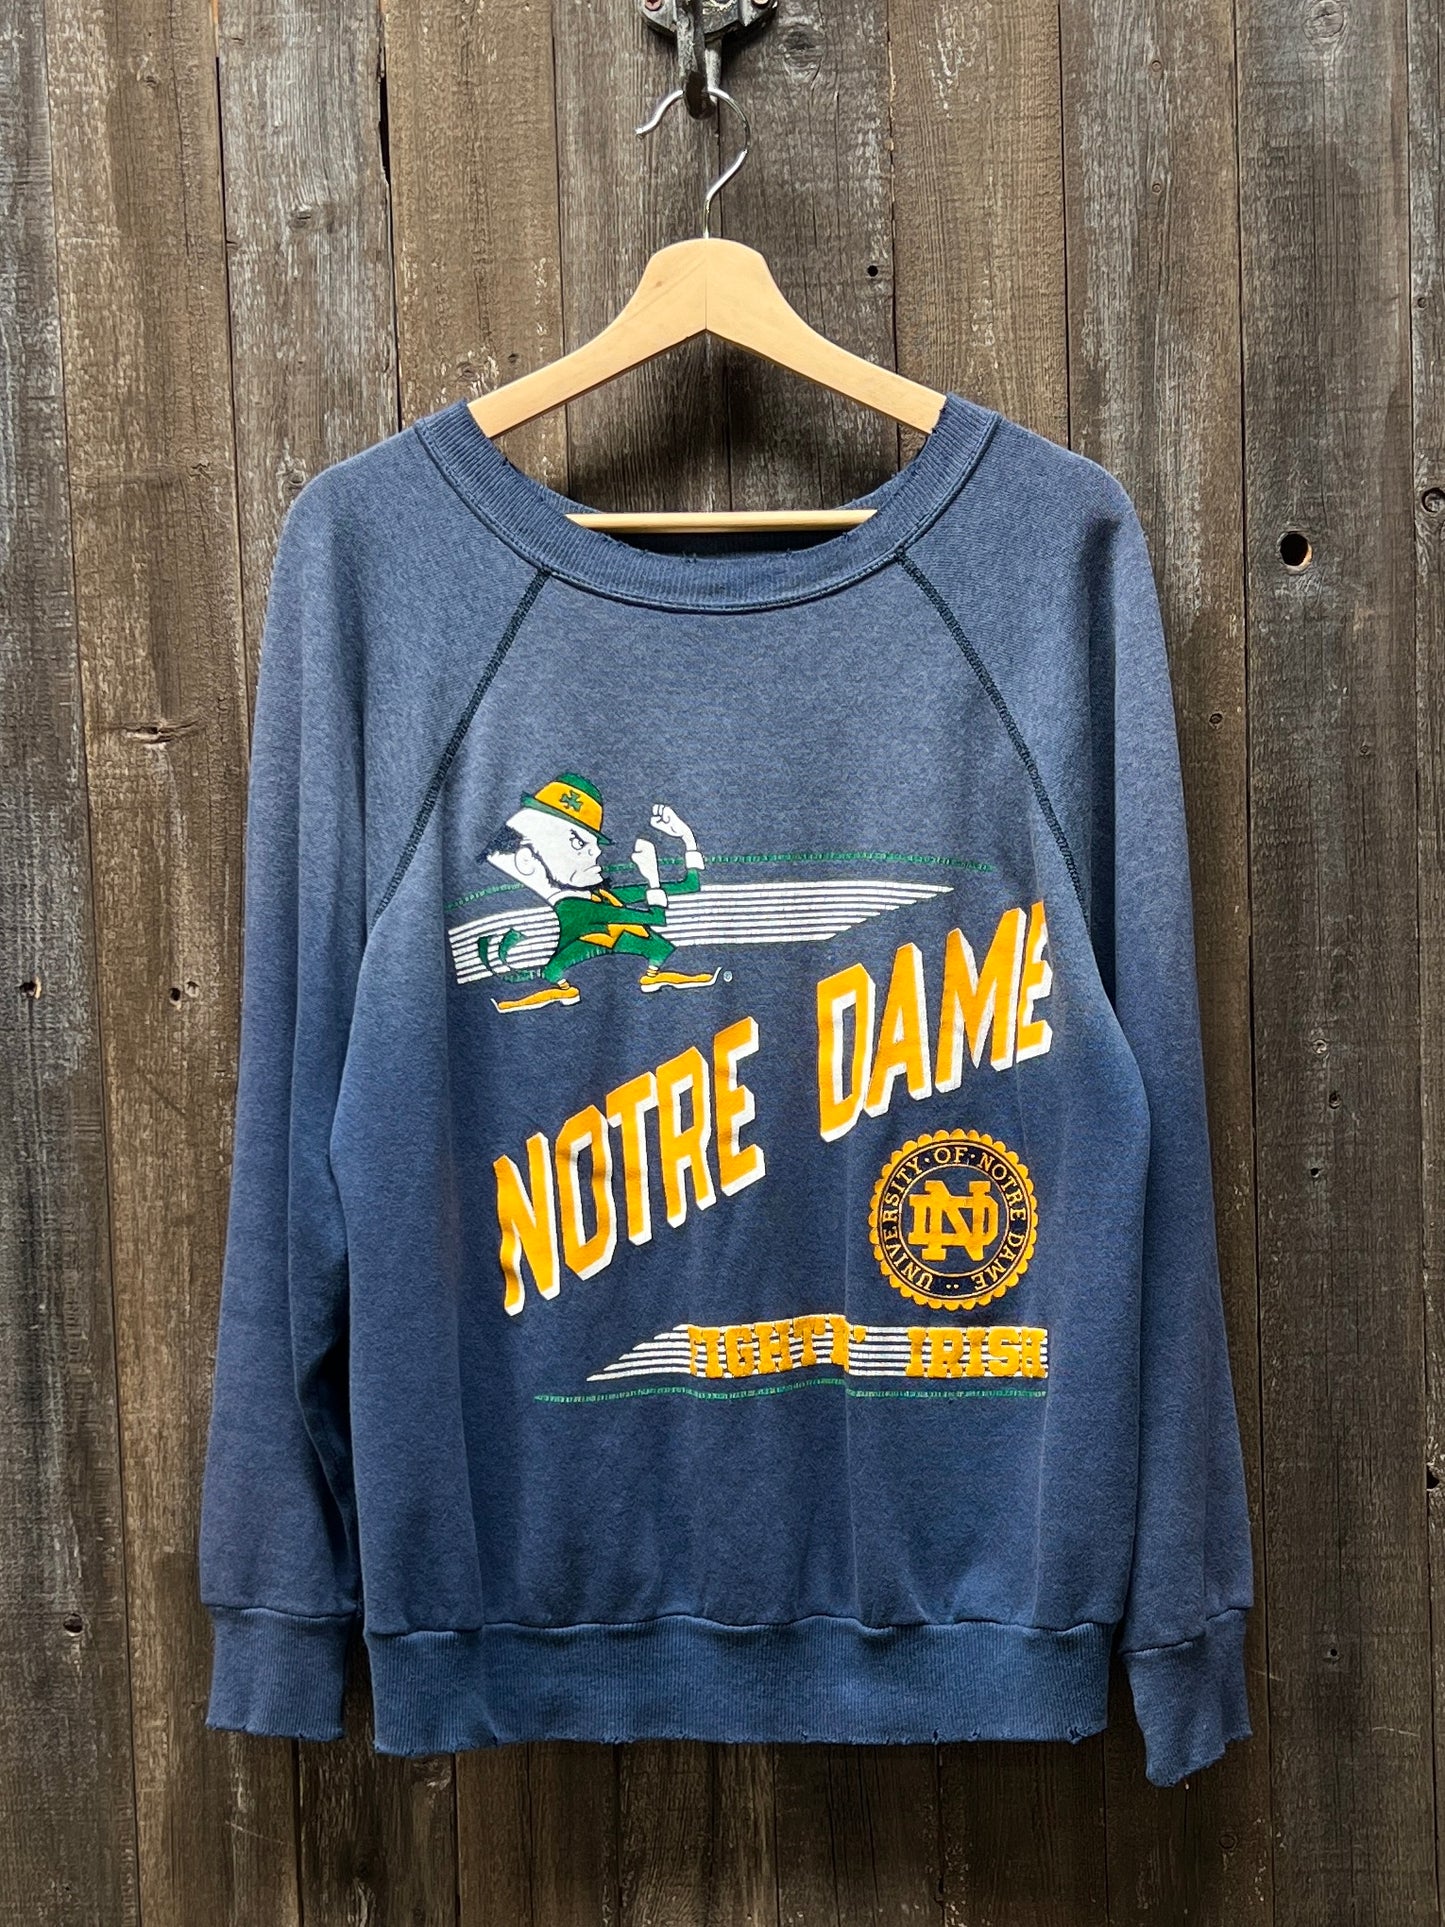 Notre Dame Sweatshirt - M-Customize Your Embroidery Wording